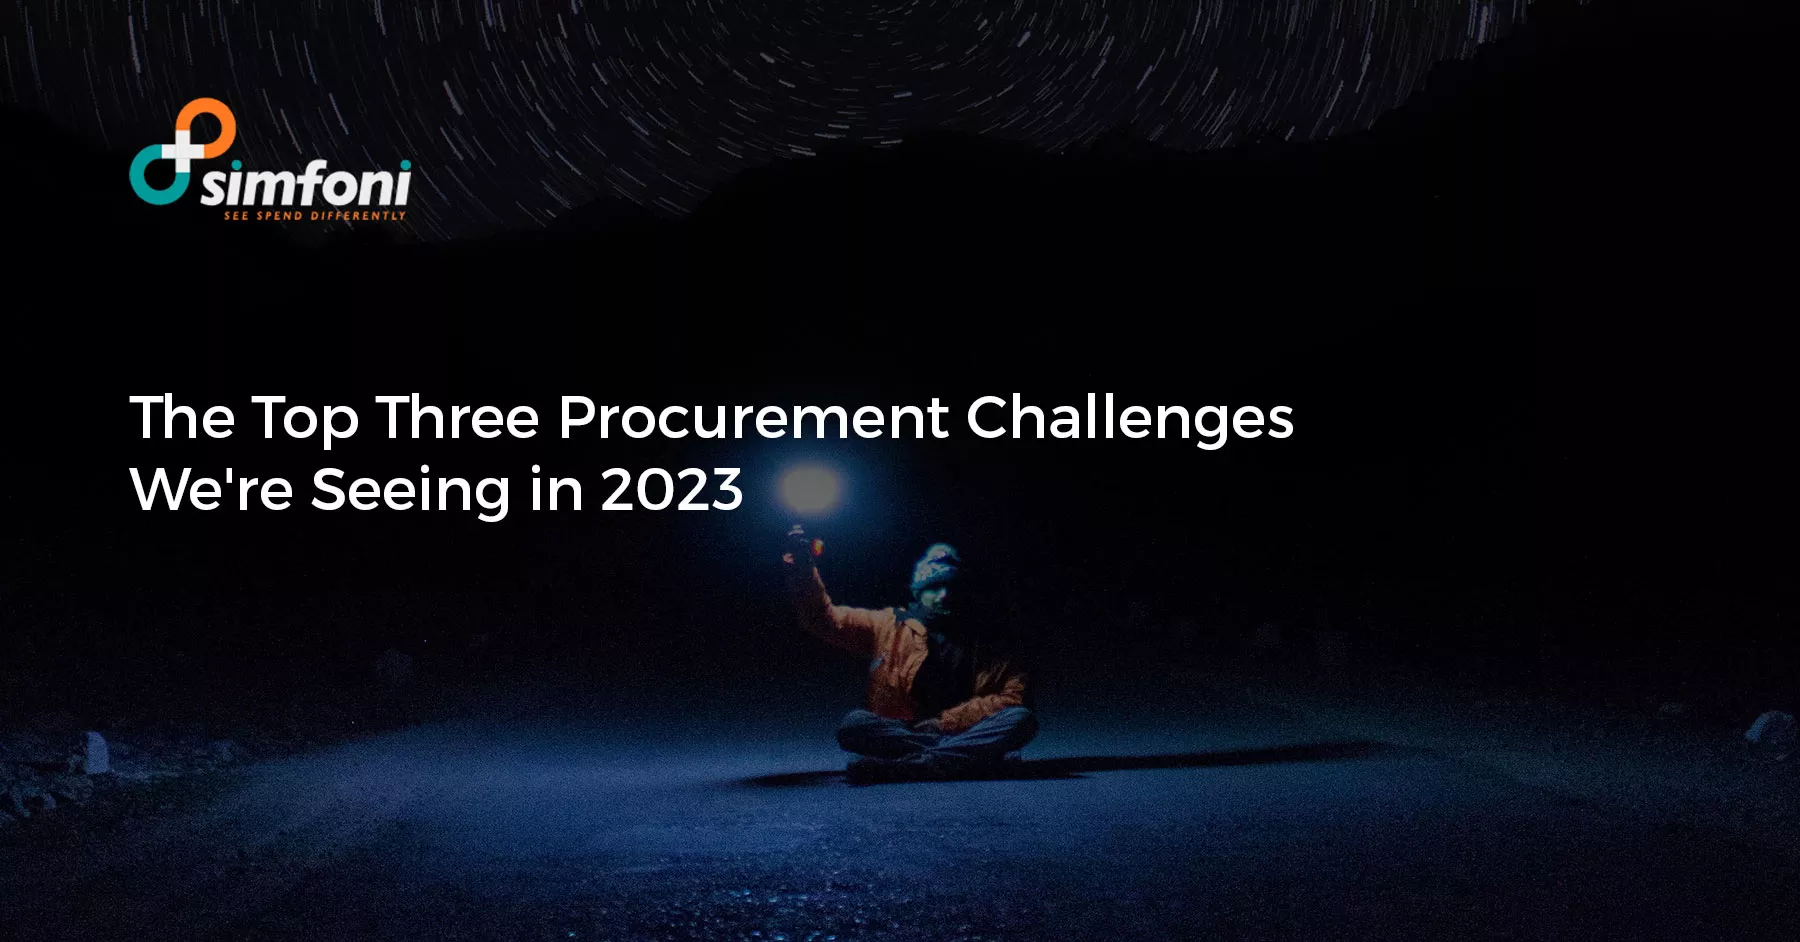 The Top Three Procurement Challenges We’re Seeing in 2023